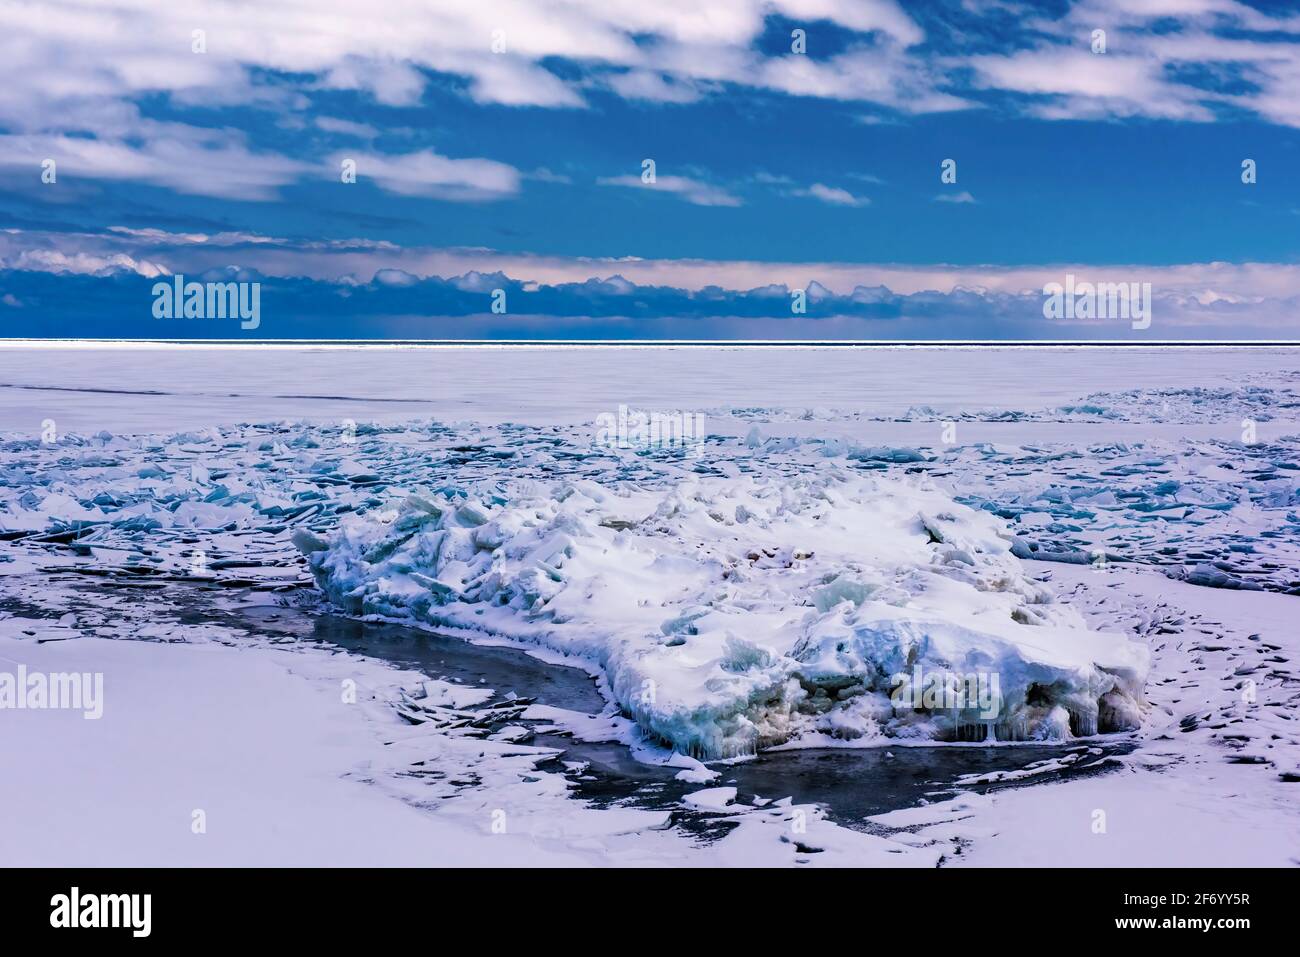 Frozen sculptures on Lake Huron with blue ice, Port Sanilac, Michigan Stock Photo